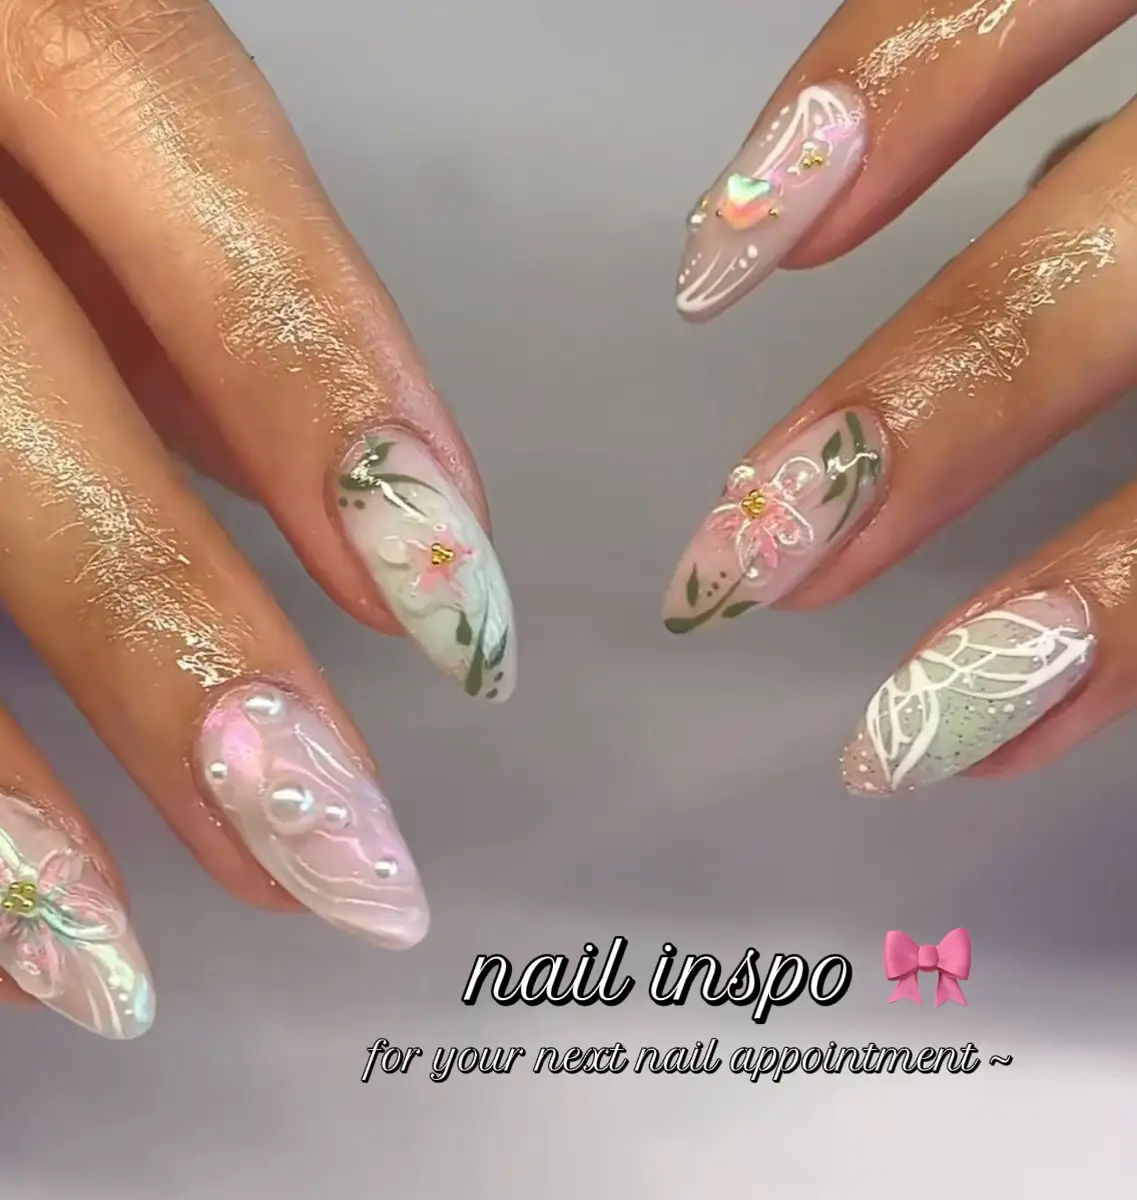 nail inspo 🎀's images